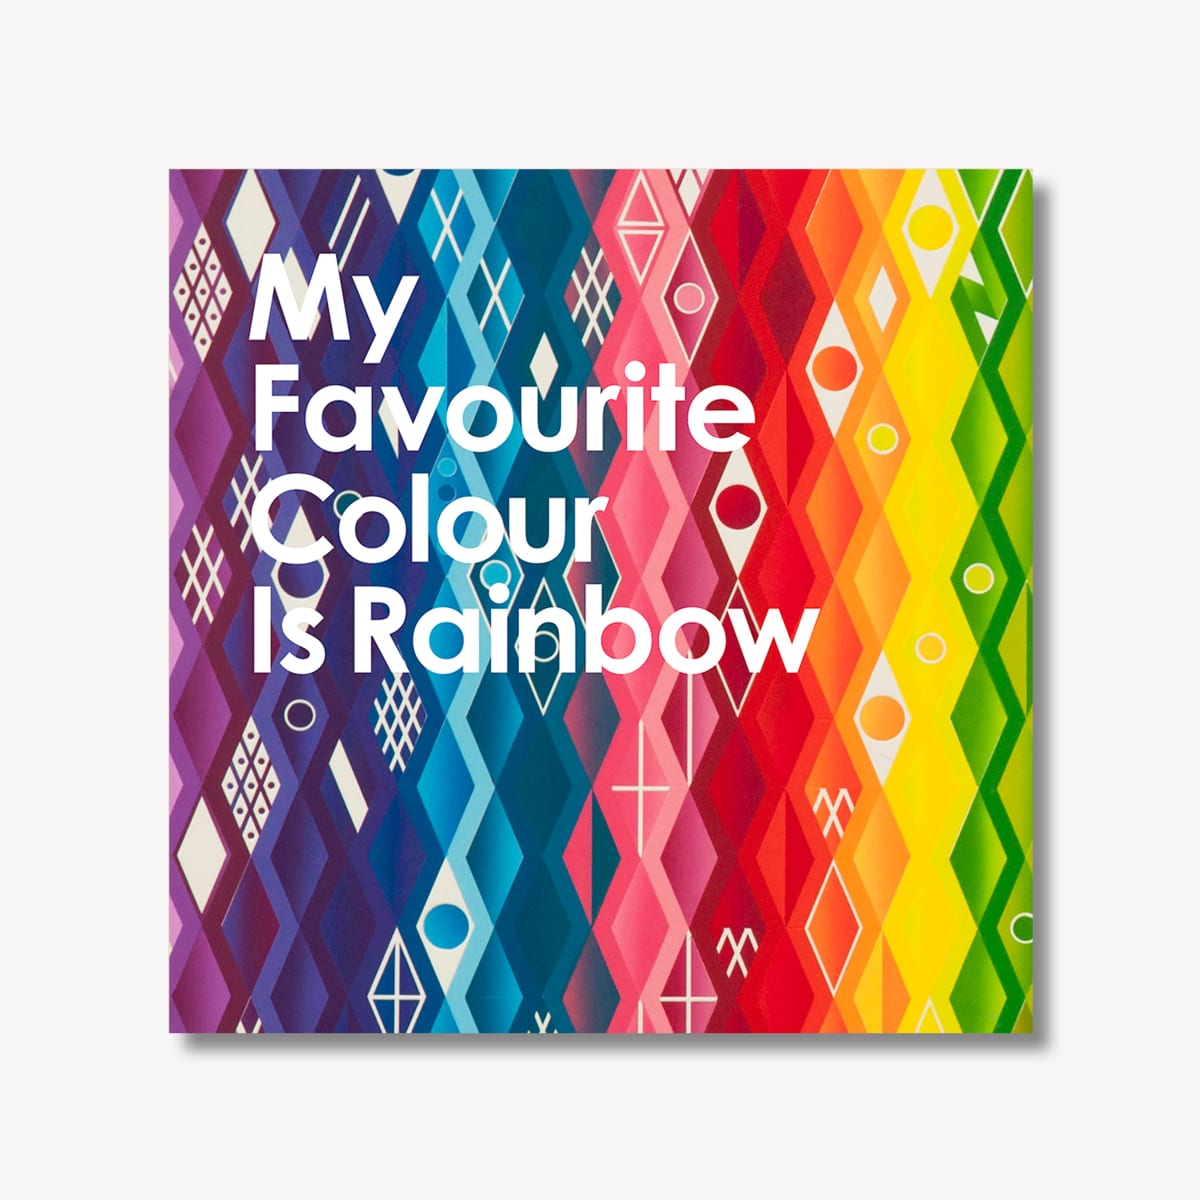 My Favourite Colour is Rainbow